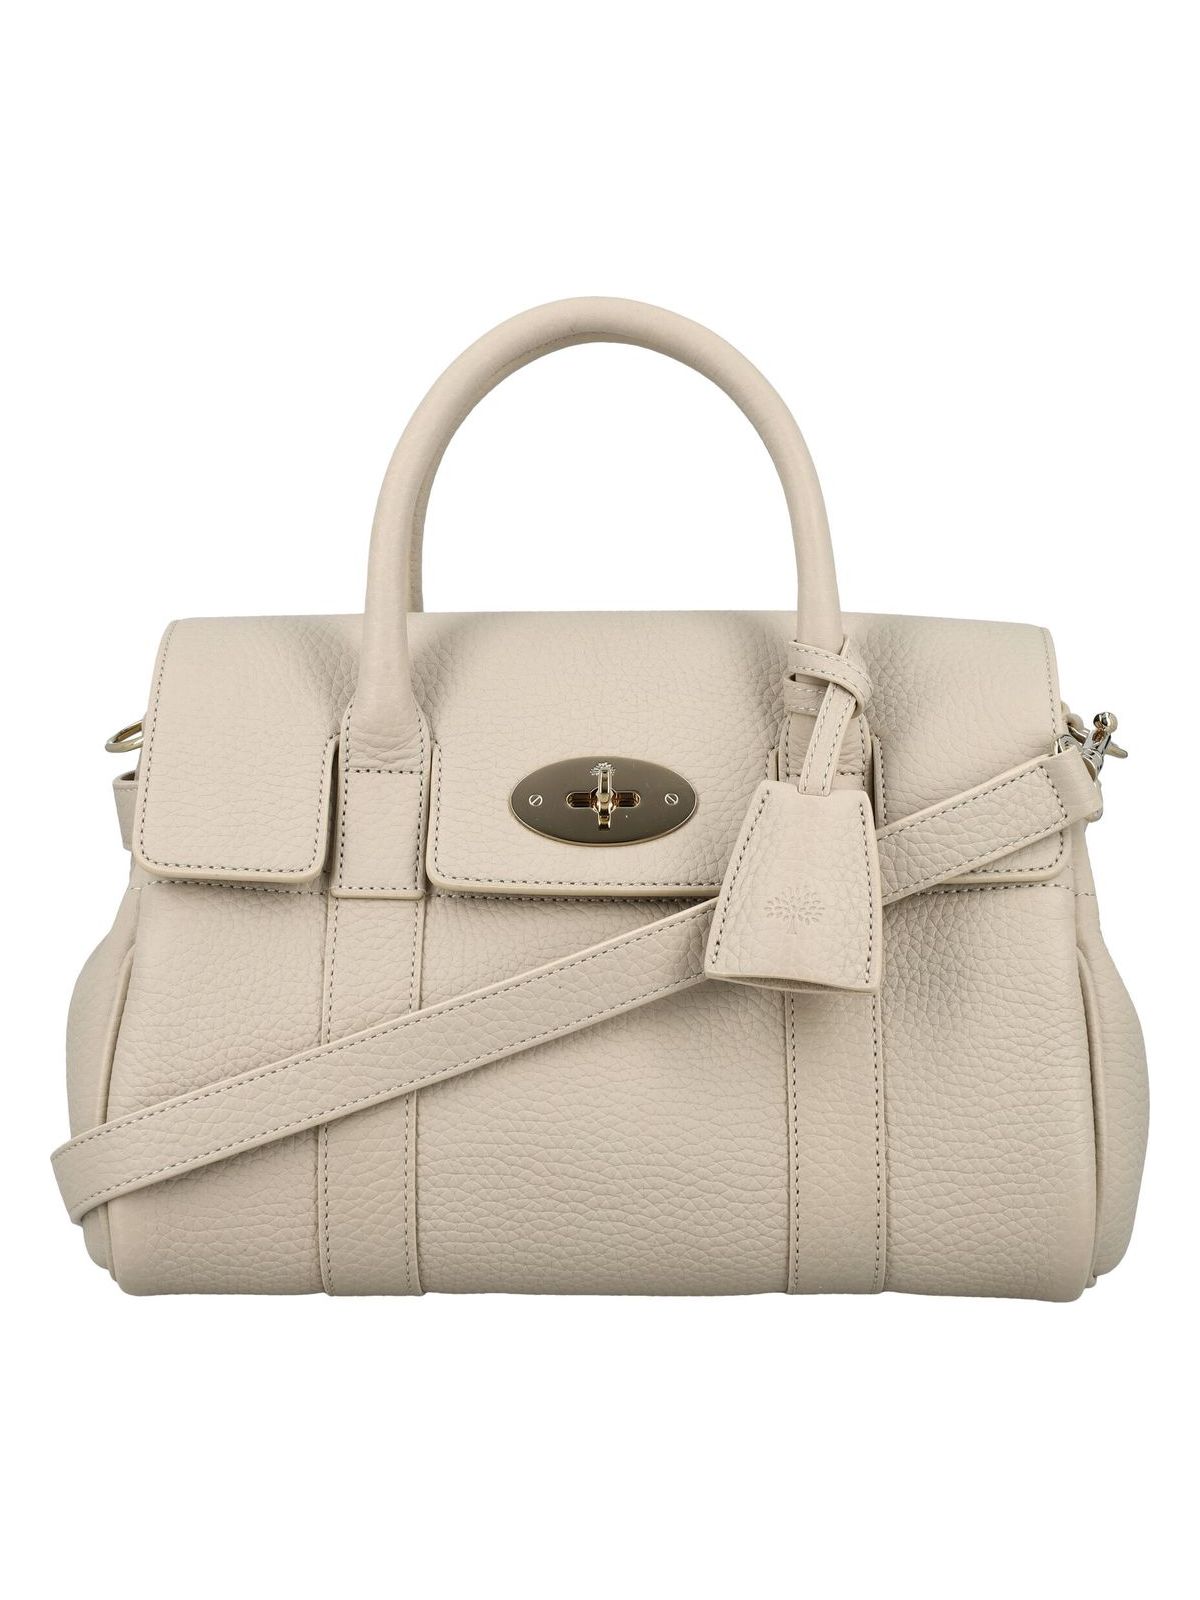 W160 MULBERRY SMALL BAYSWATER SATCHEL HG